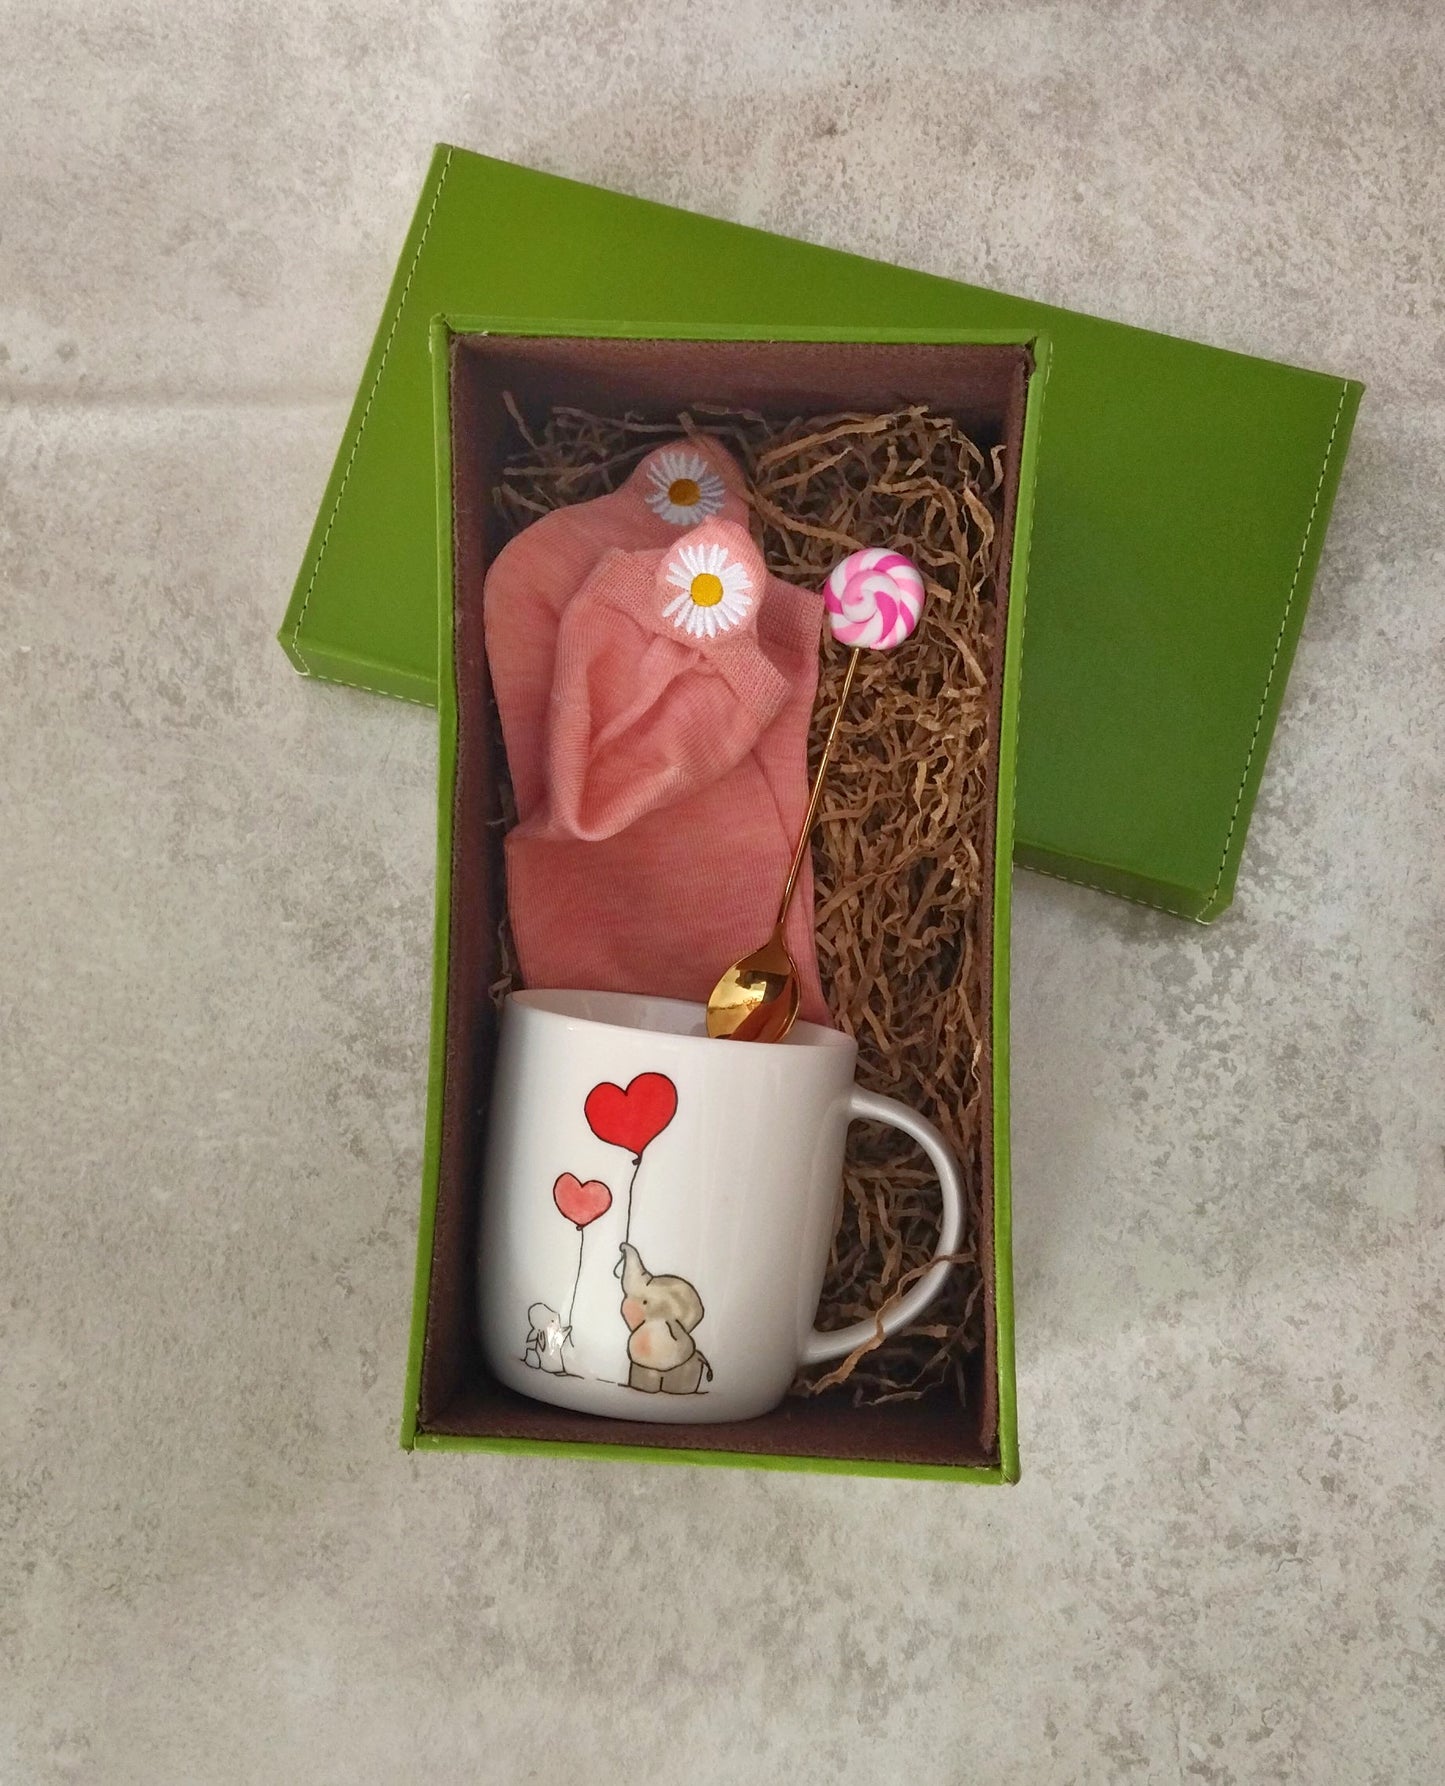 Hug In A Box, Cute Ceramic Cup With Christmas Spoon And Embroidered Socks